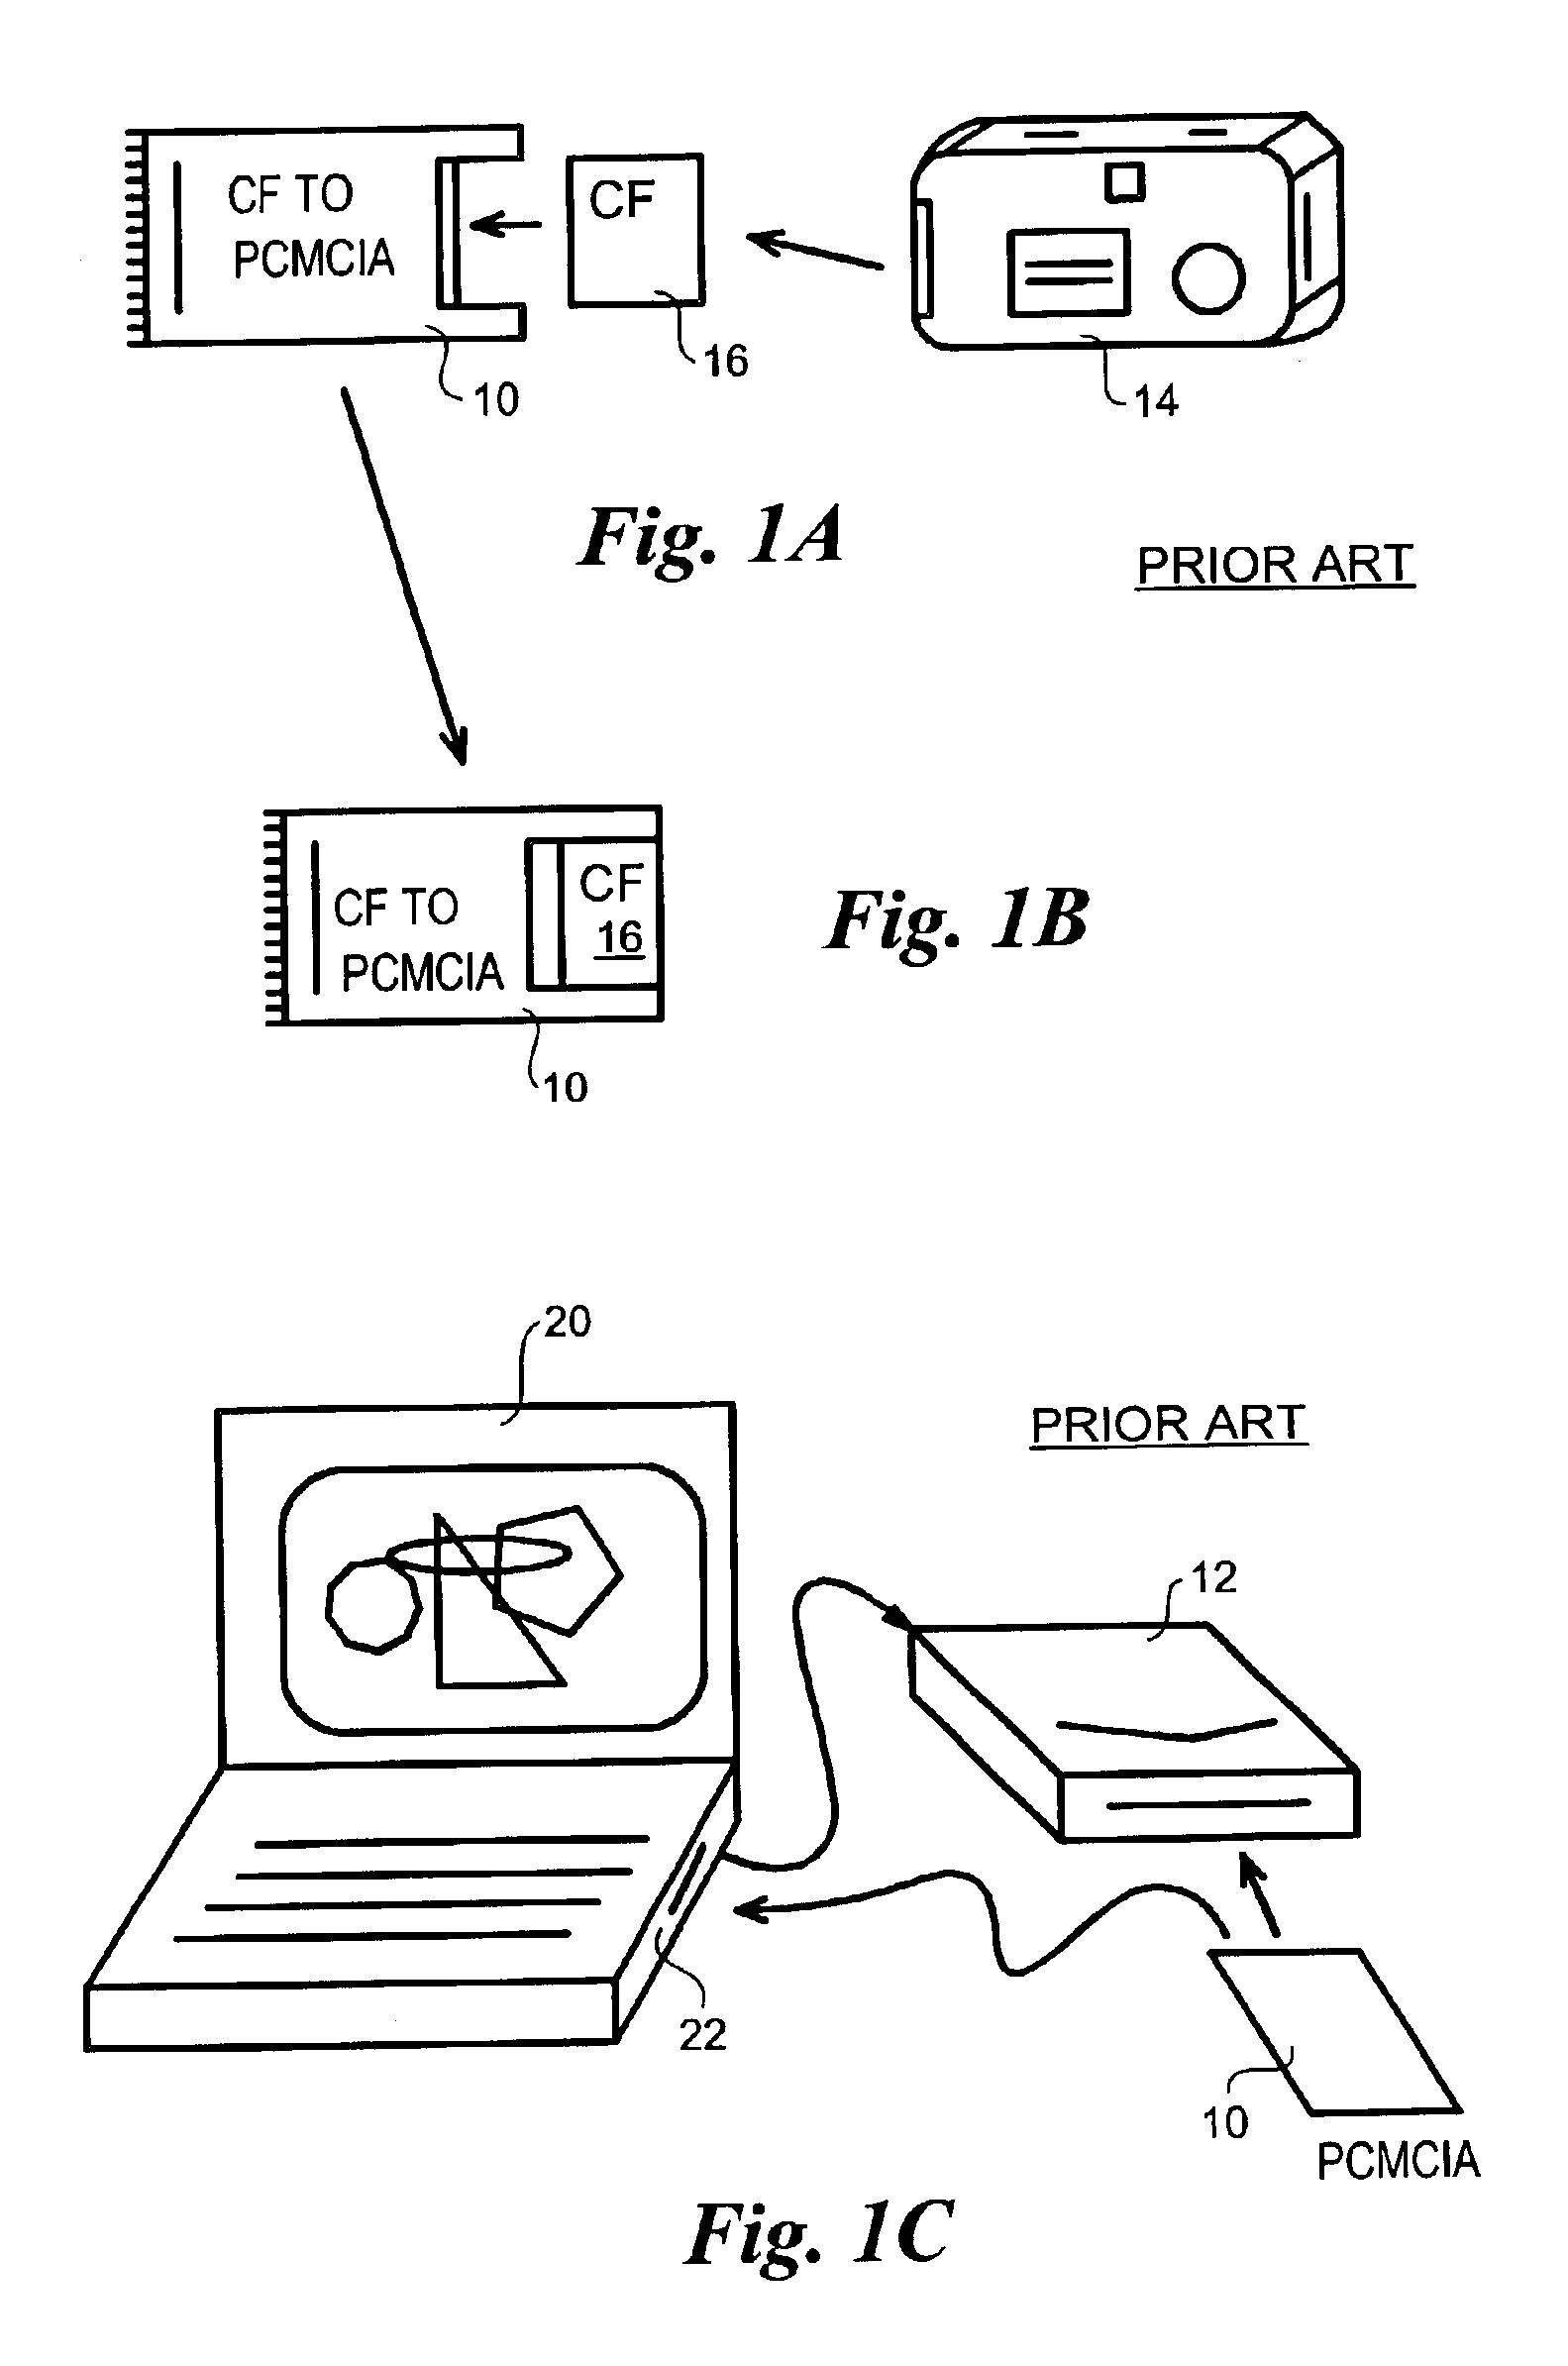 Field-operable, stand-alone apparatus for media recovery and regeneration